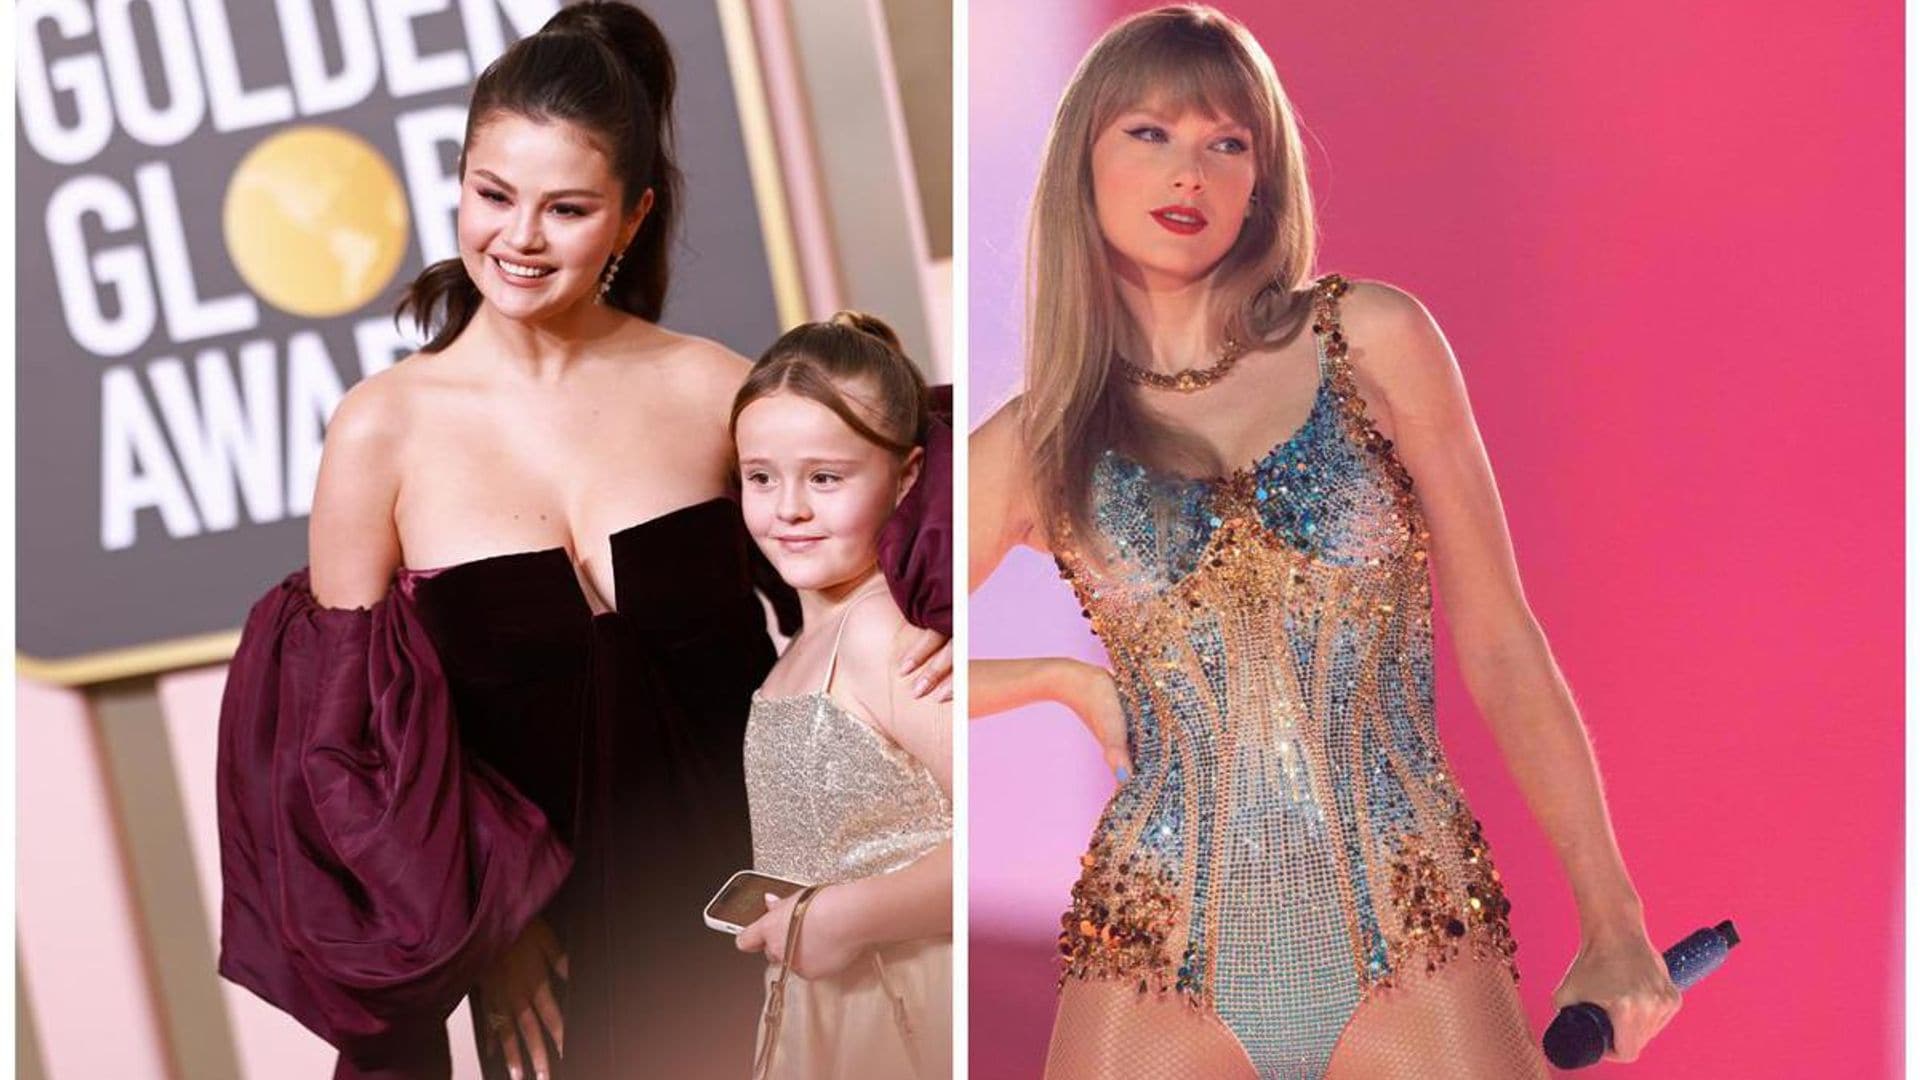 Selena Gomez and her sister Gracie dress up as Taylor Swift and enjoy sweet moment mid-concert